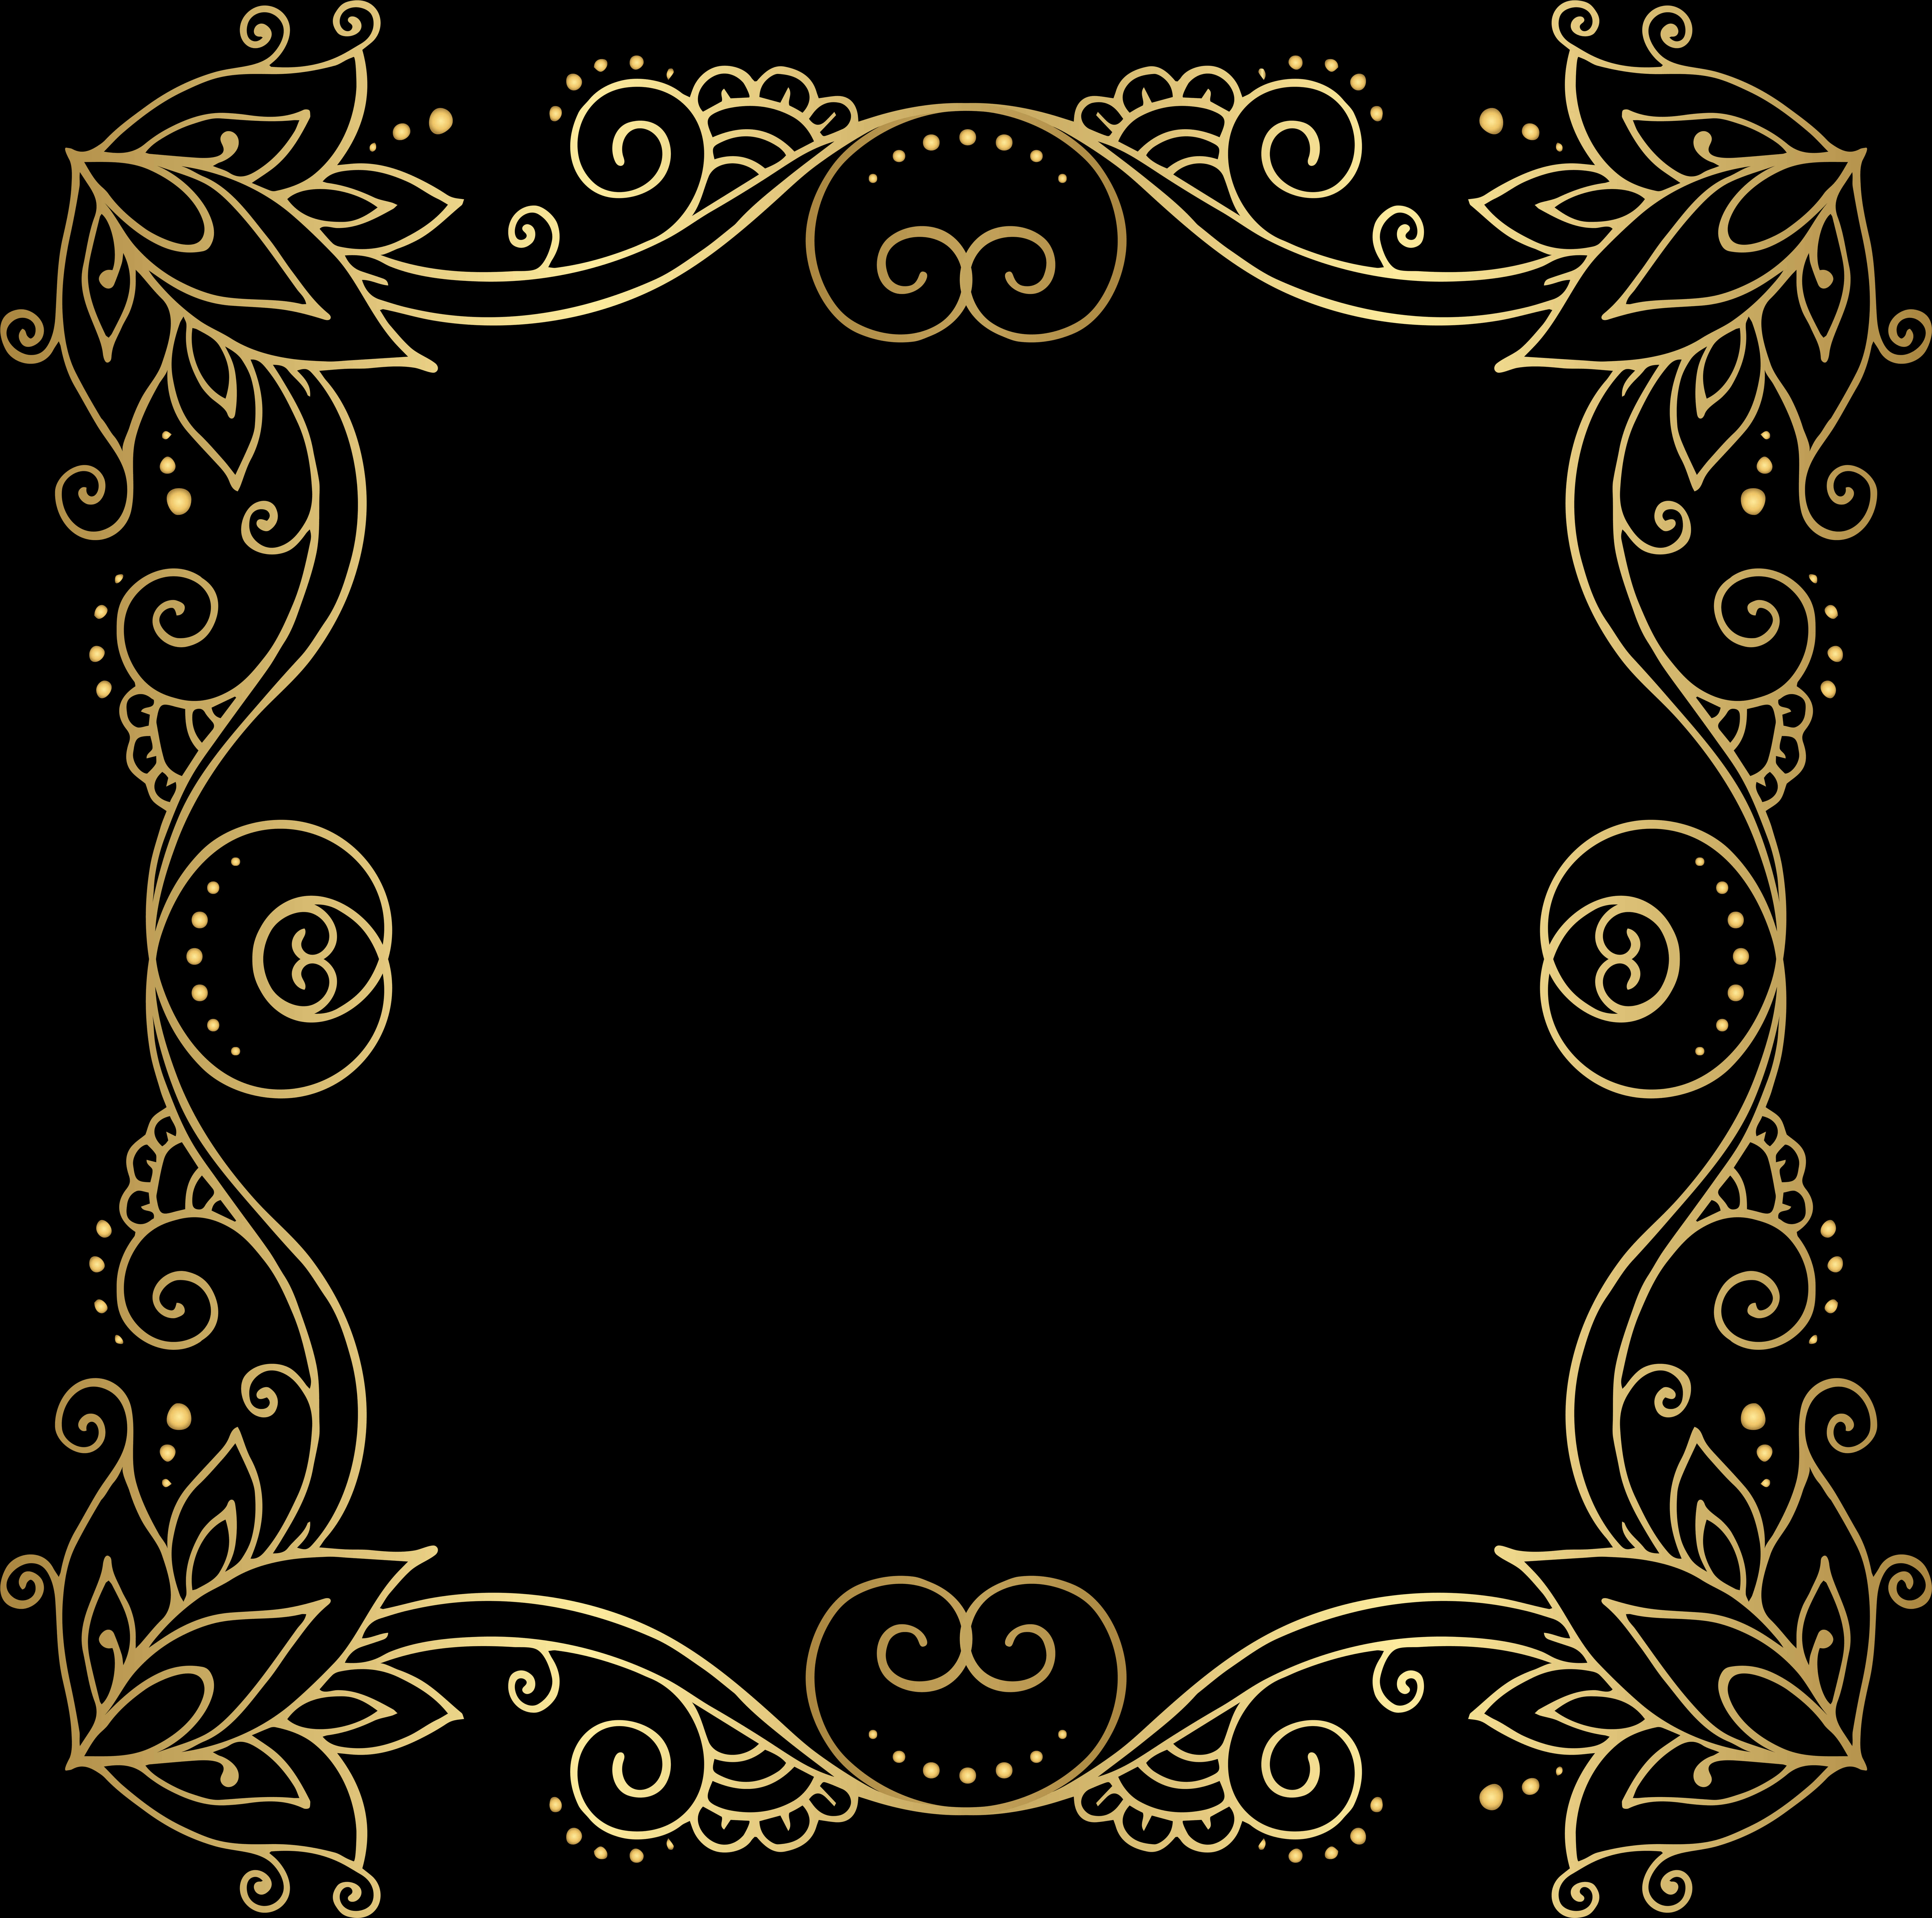 A Gold Frame With Swirls And Leaves